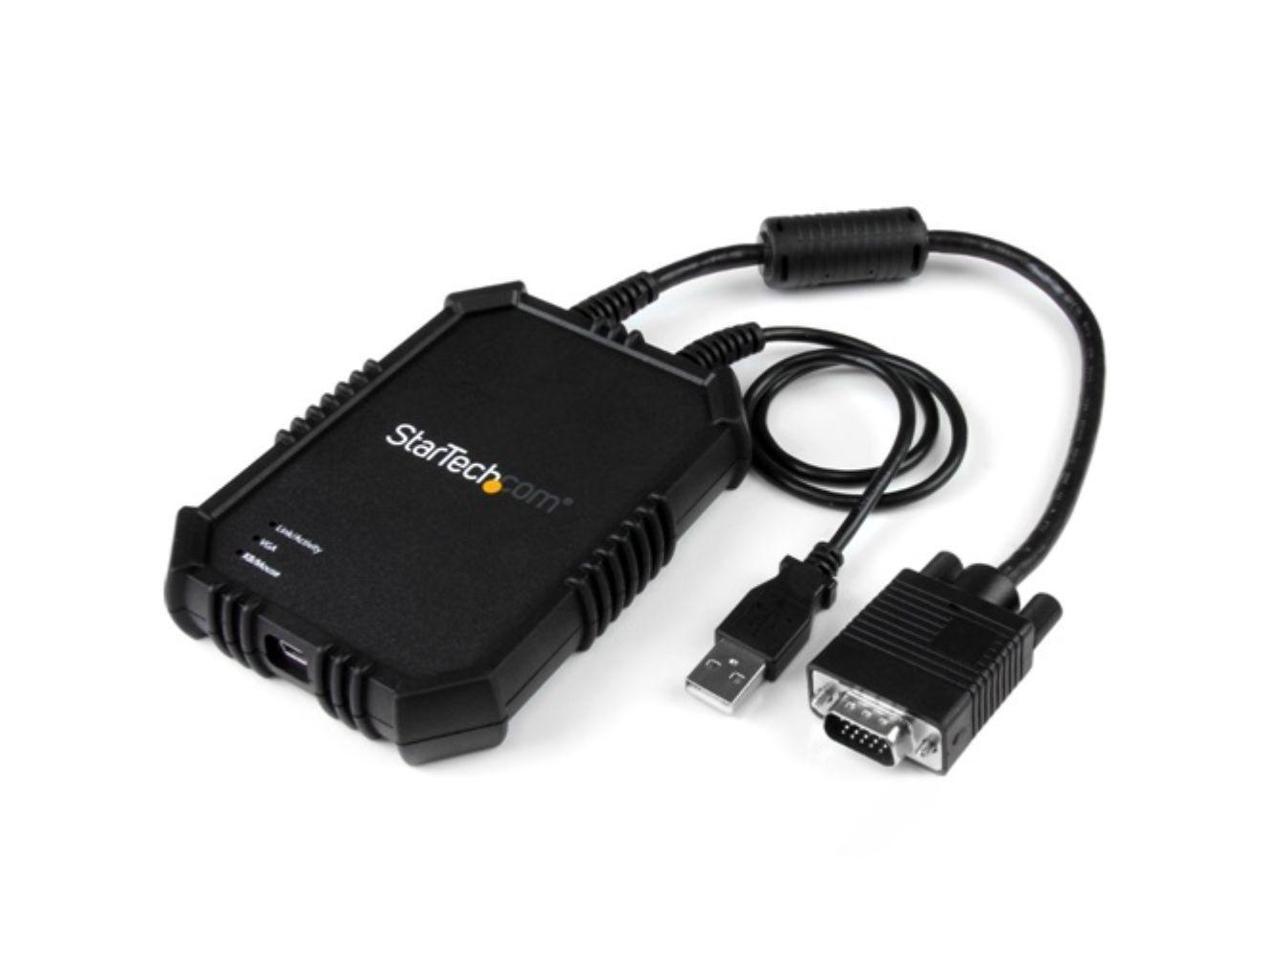 usb 2.0 to ethernet adapter for file transfer